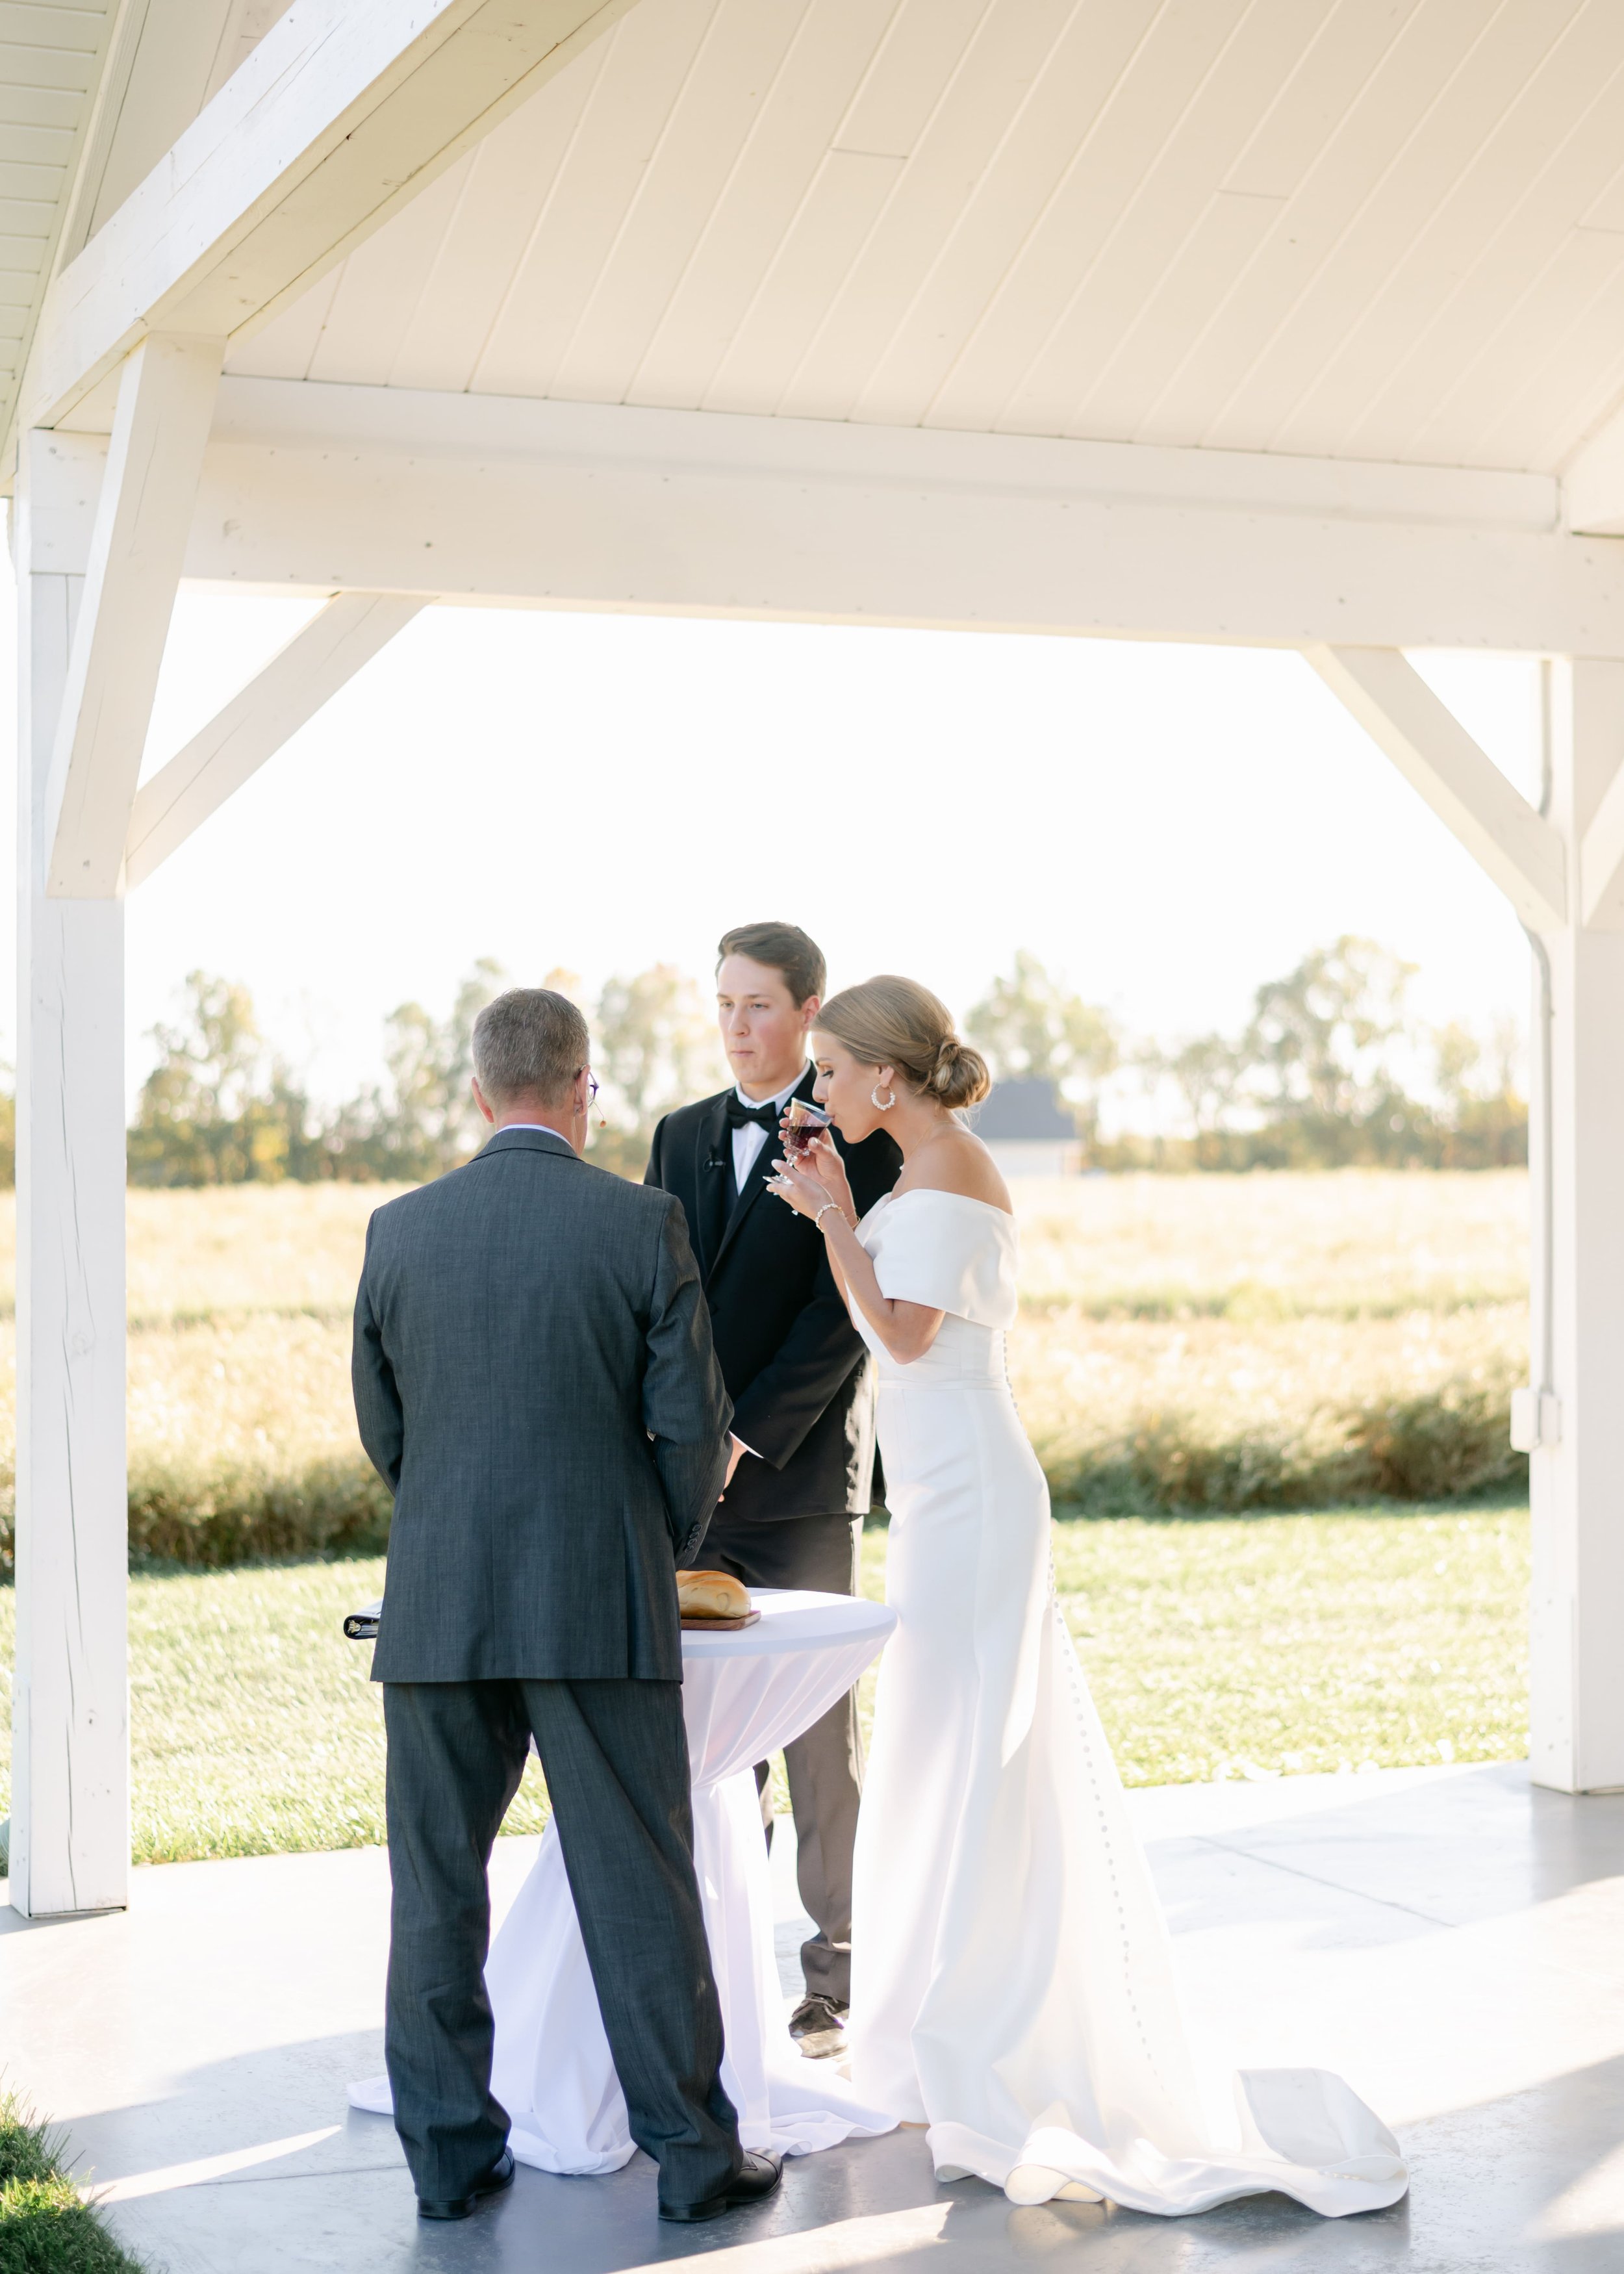 outdoor fall wedding ceremony_interactive_family focused_emerson fields (10).jpg